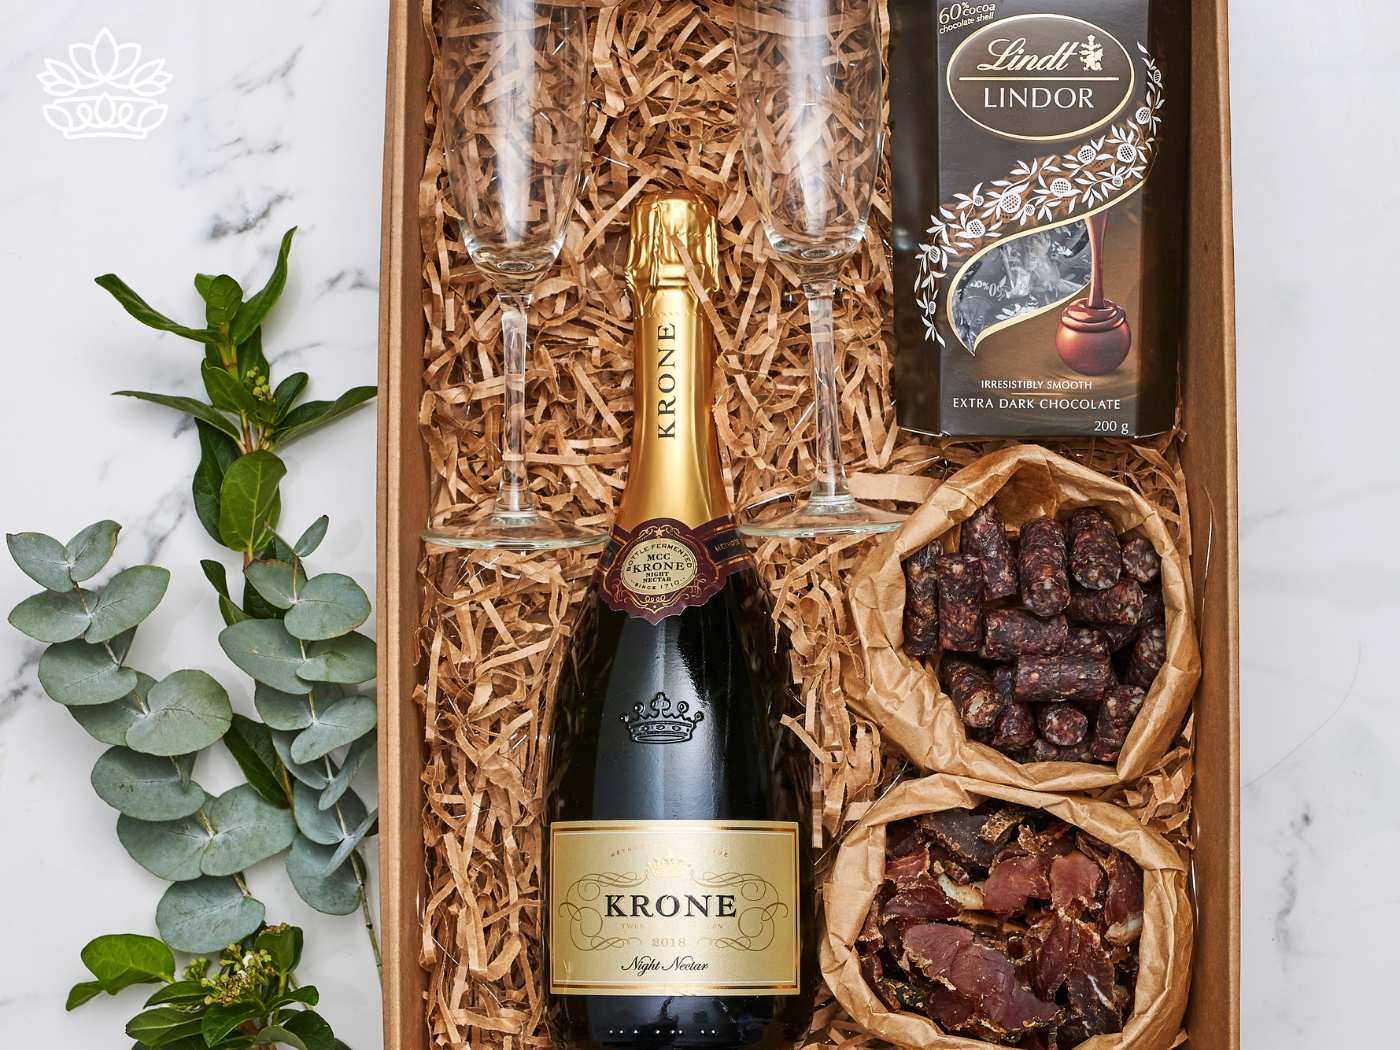 Deluxe graduation gift box from Fabulous Flowers and Gifts, featuring a bottle of Krone sparkling wine, a crystal flute, Lindt extra dark chocolate, and artisanal cured meats, all nestled in a rustic wooden crate with decorative greenery.